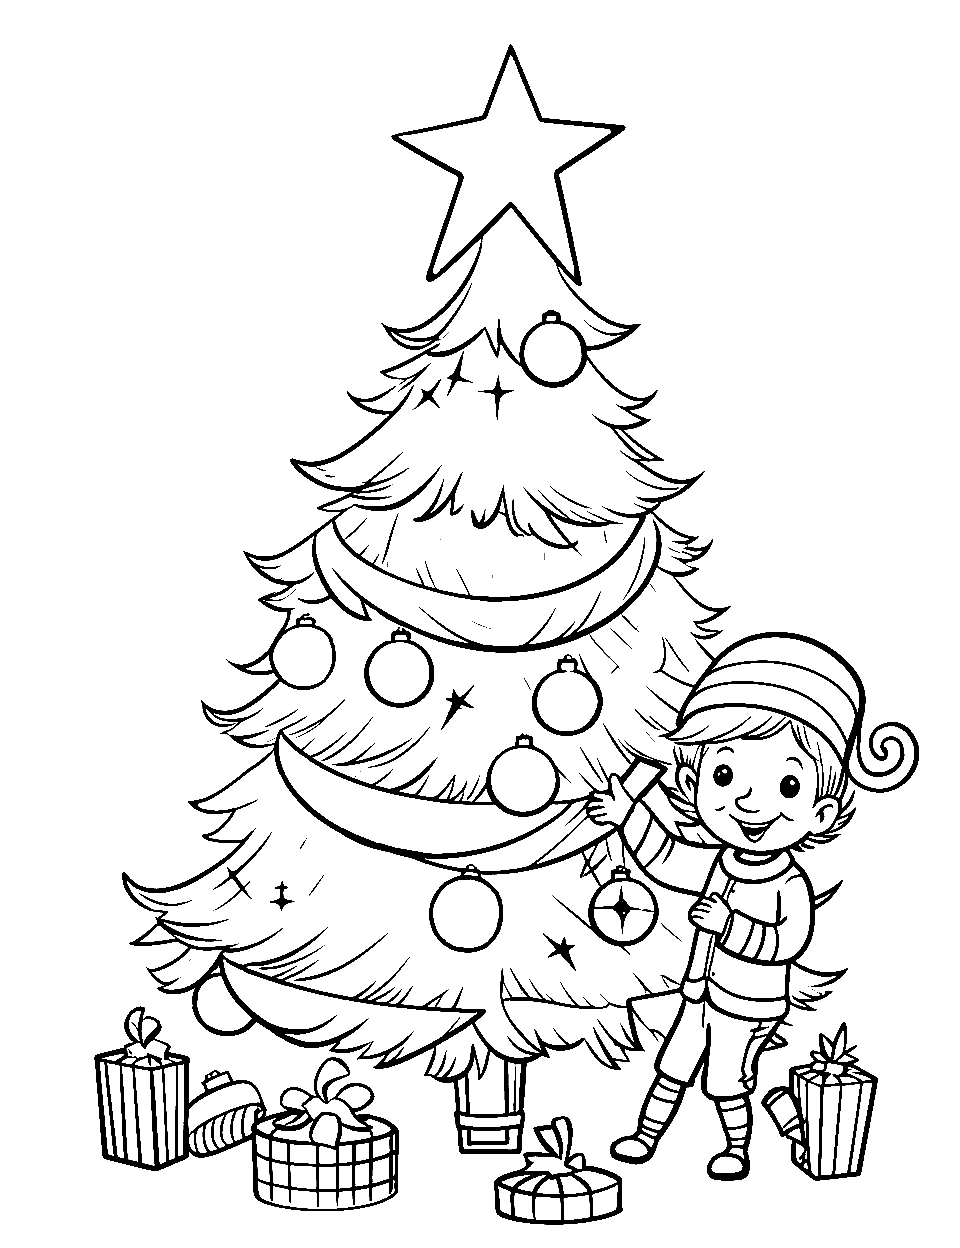 Joyful Elf Preparing Tree Coloring Page - An excited elf hanging colorful baubles on a radiant Christmas tree with a joyful smile.